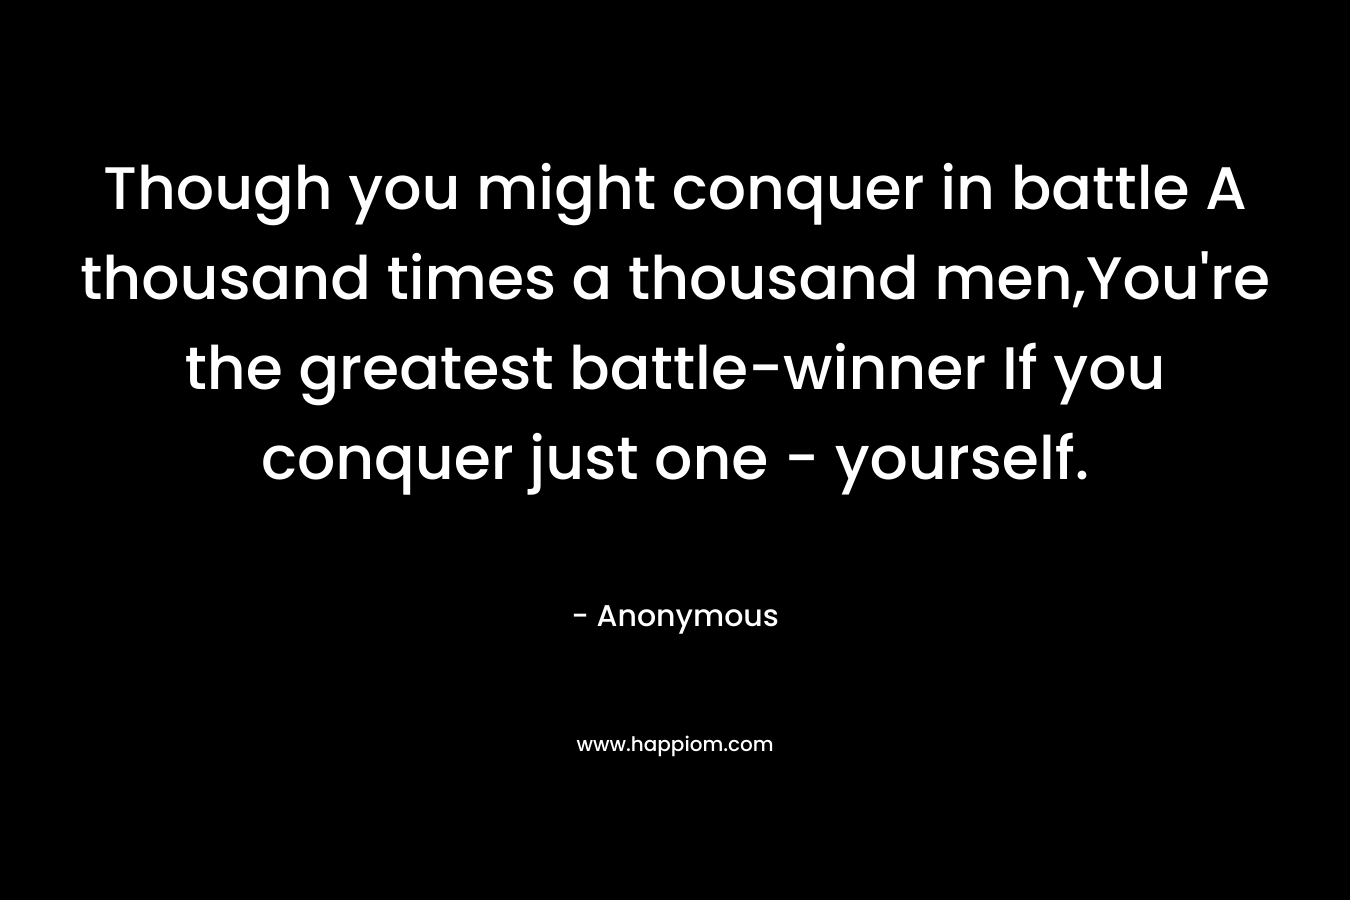 Though you might conquer in battle A thousand times a thousand men,You're the greatest battle-winner If you conquer just one - yourself.